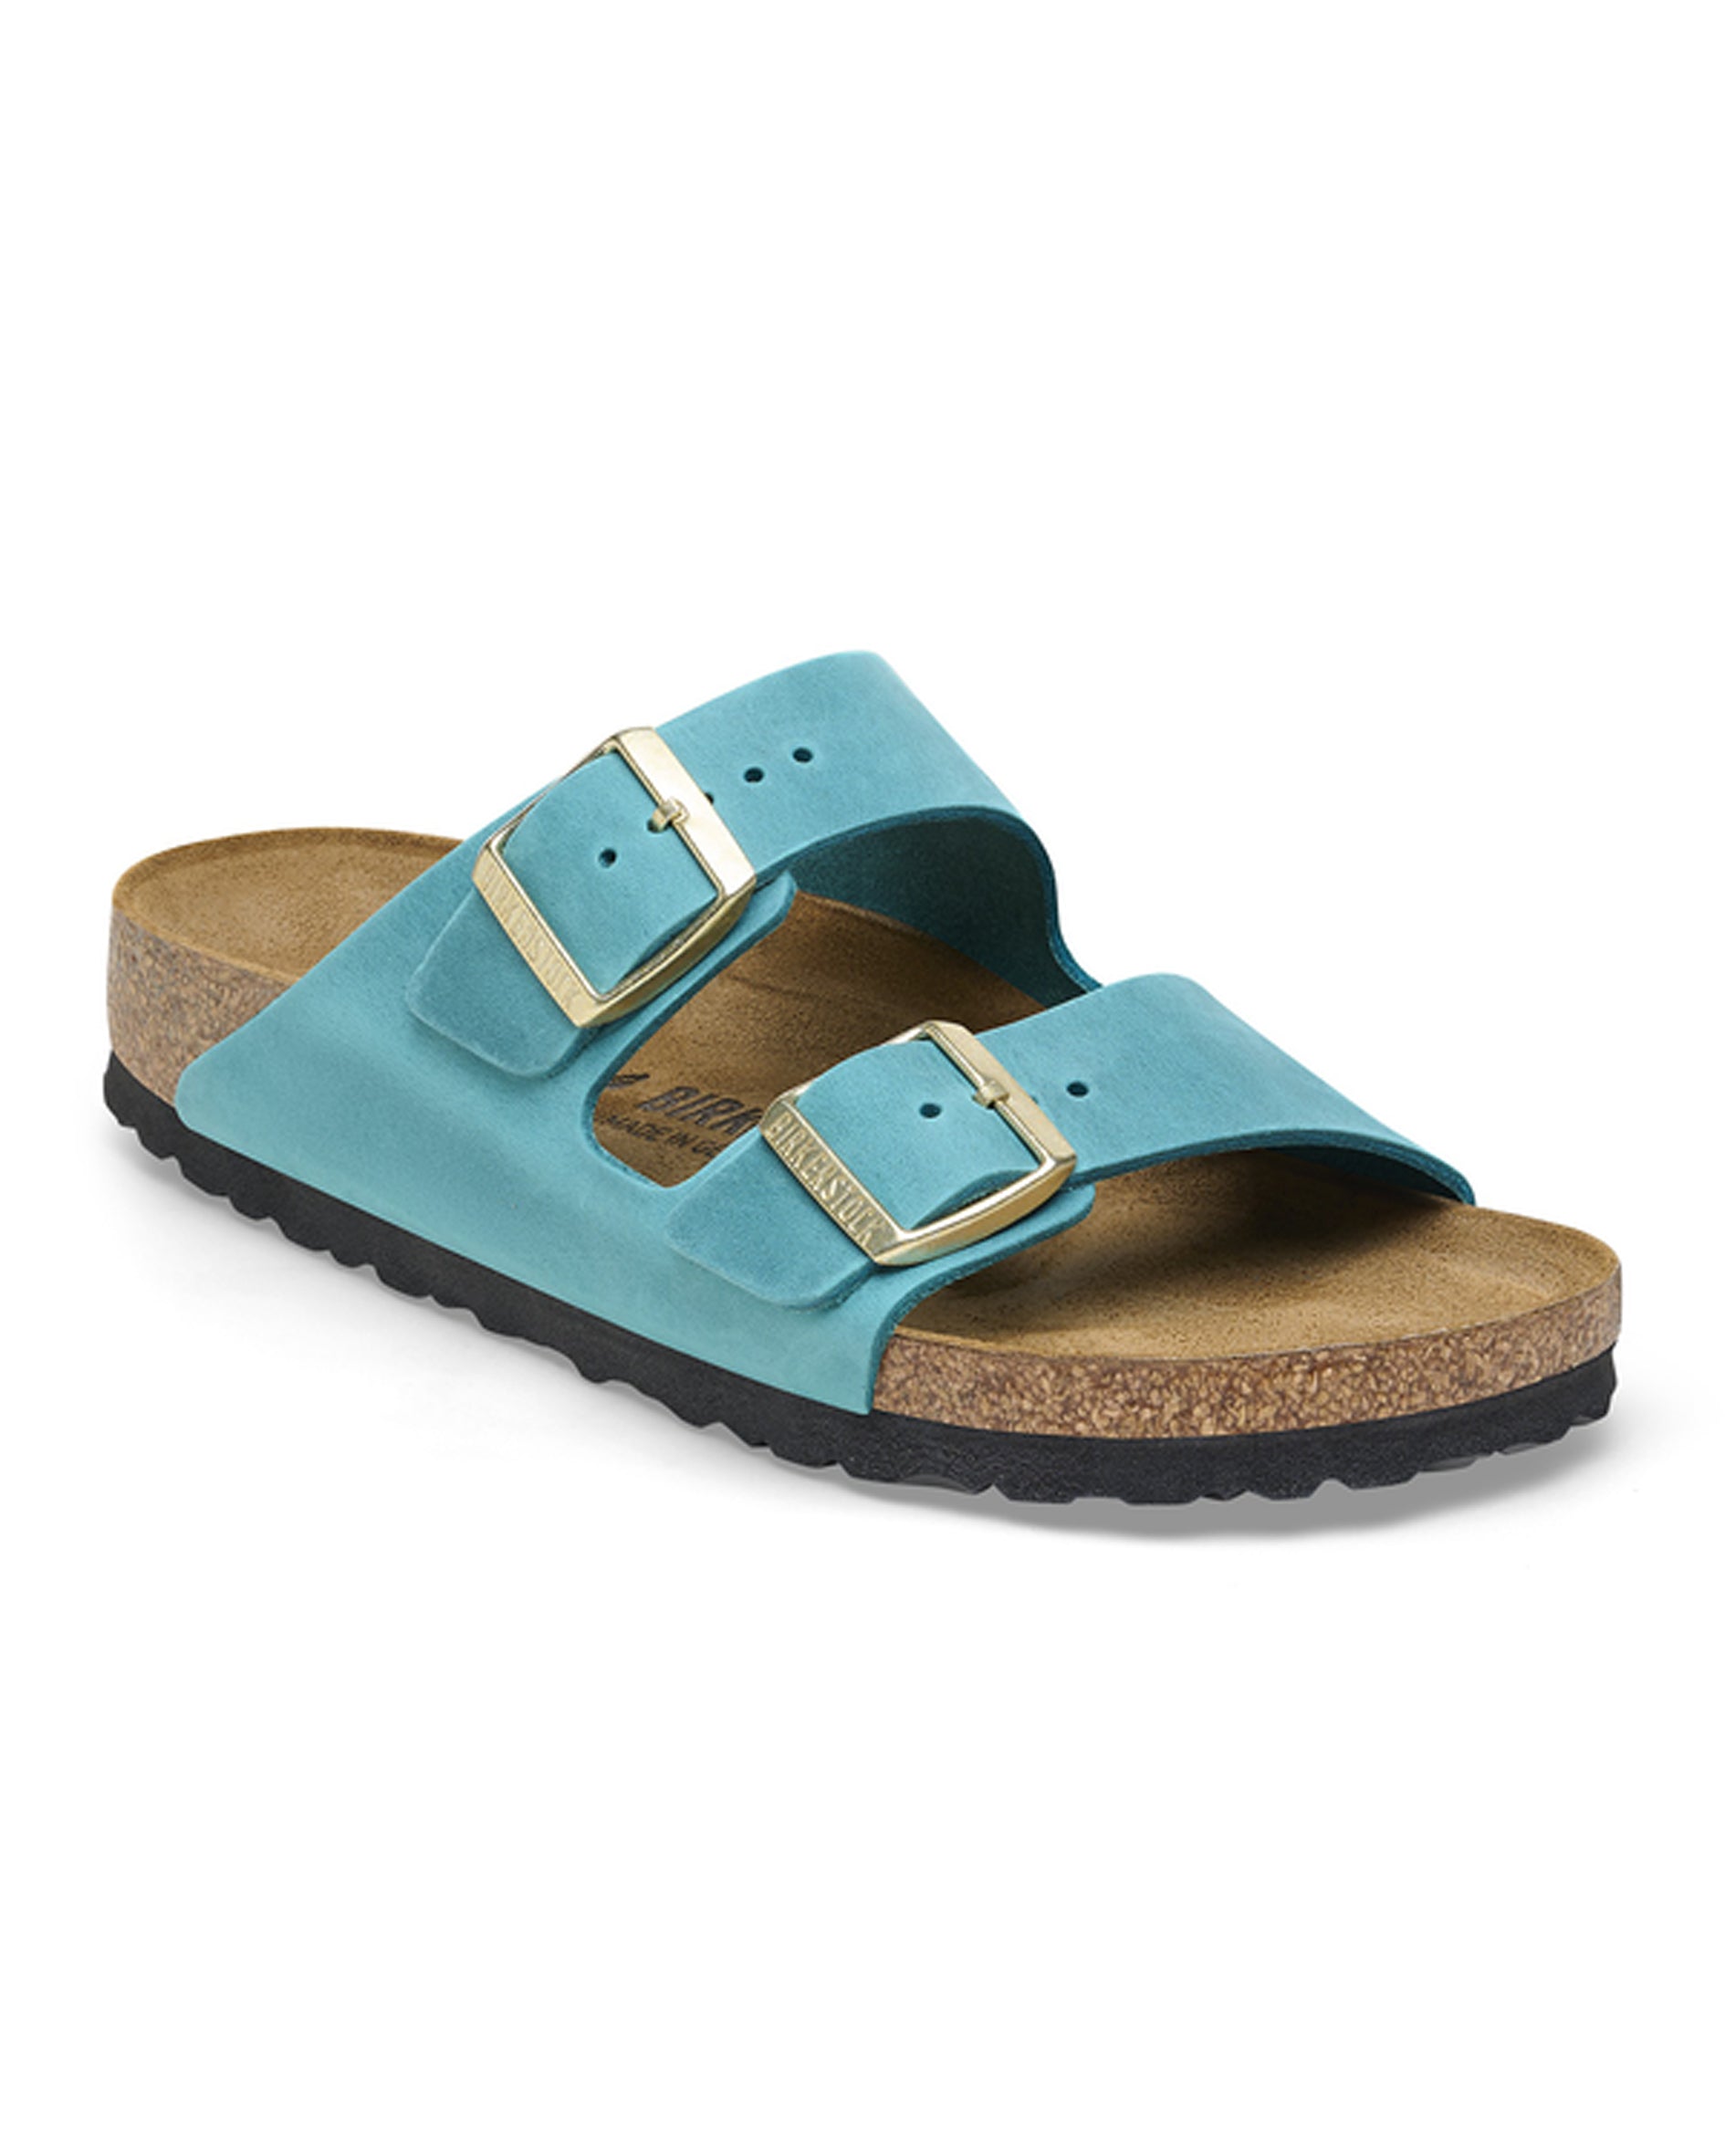 Arizona Biscay Bay Oiled Leather Sandals